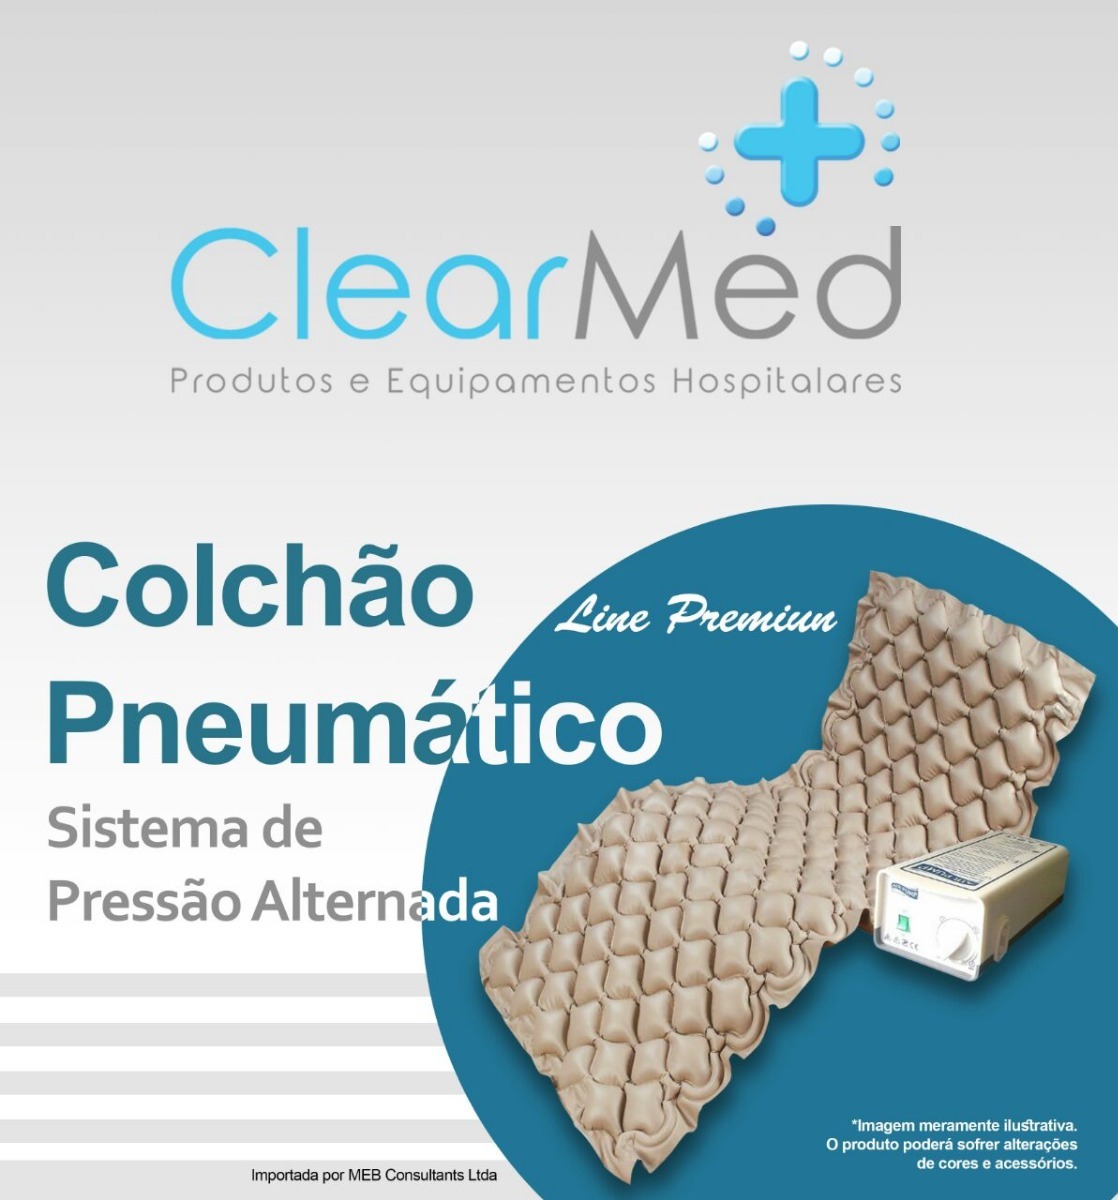 Colchao Pneumatico Clearmed